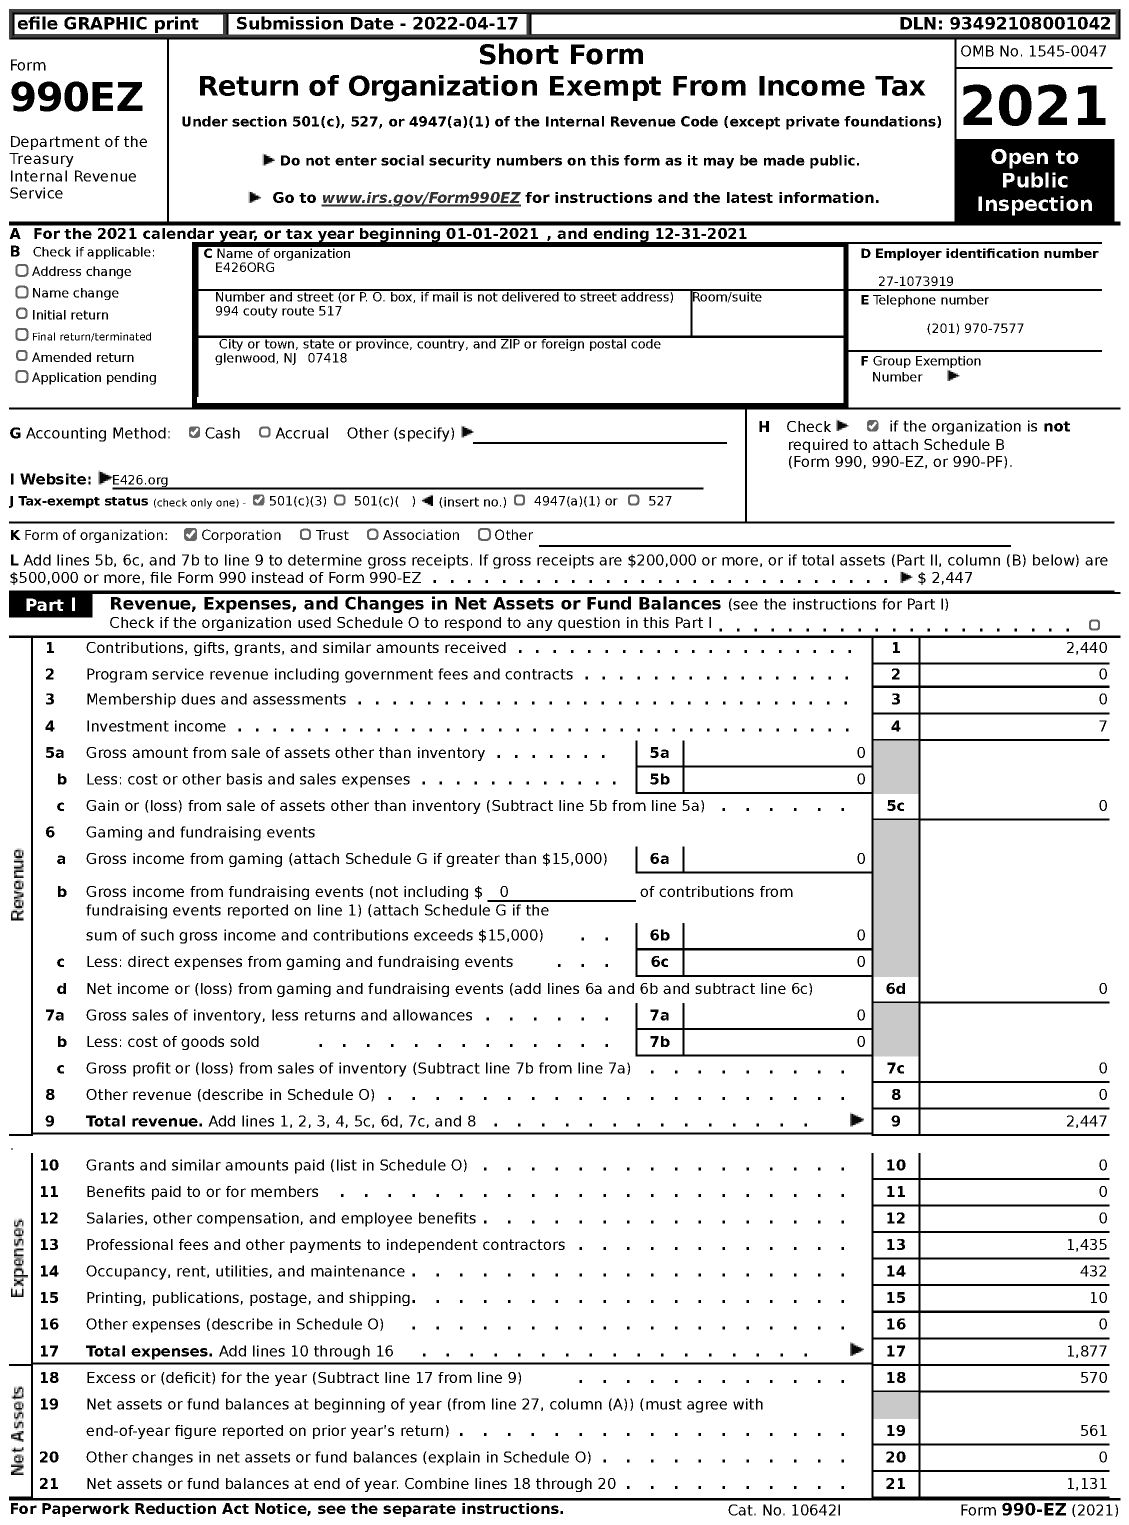 Image of first page of 2021 Form 990EZ for E426org